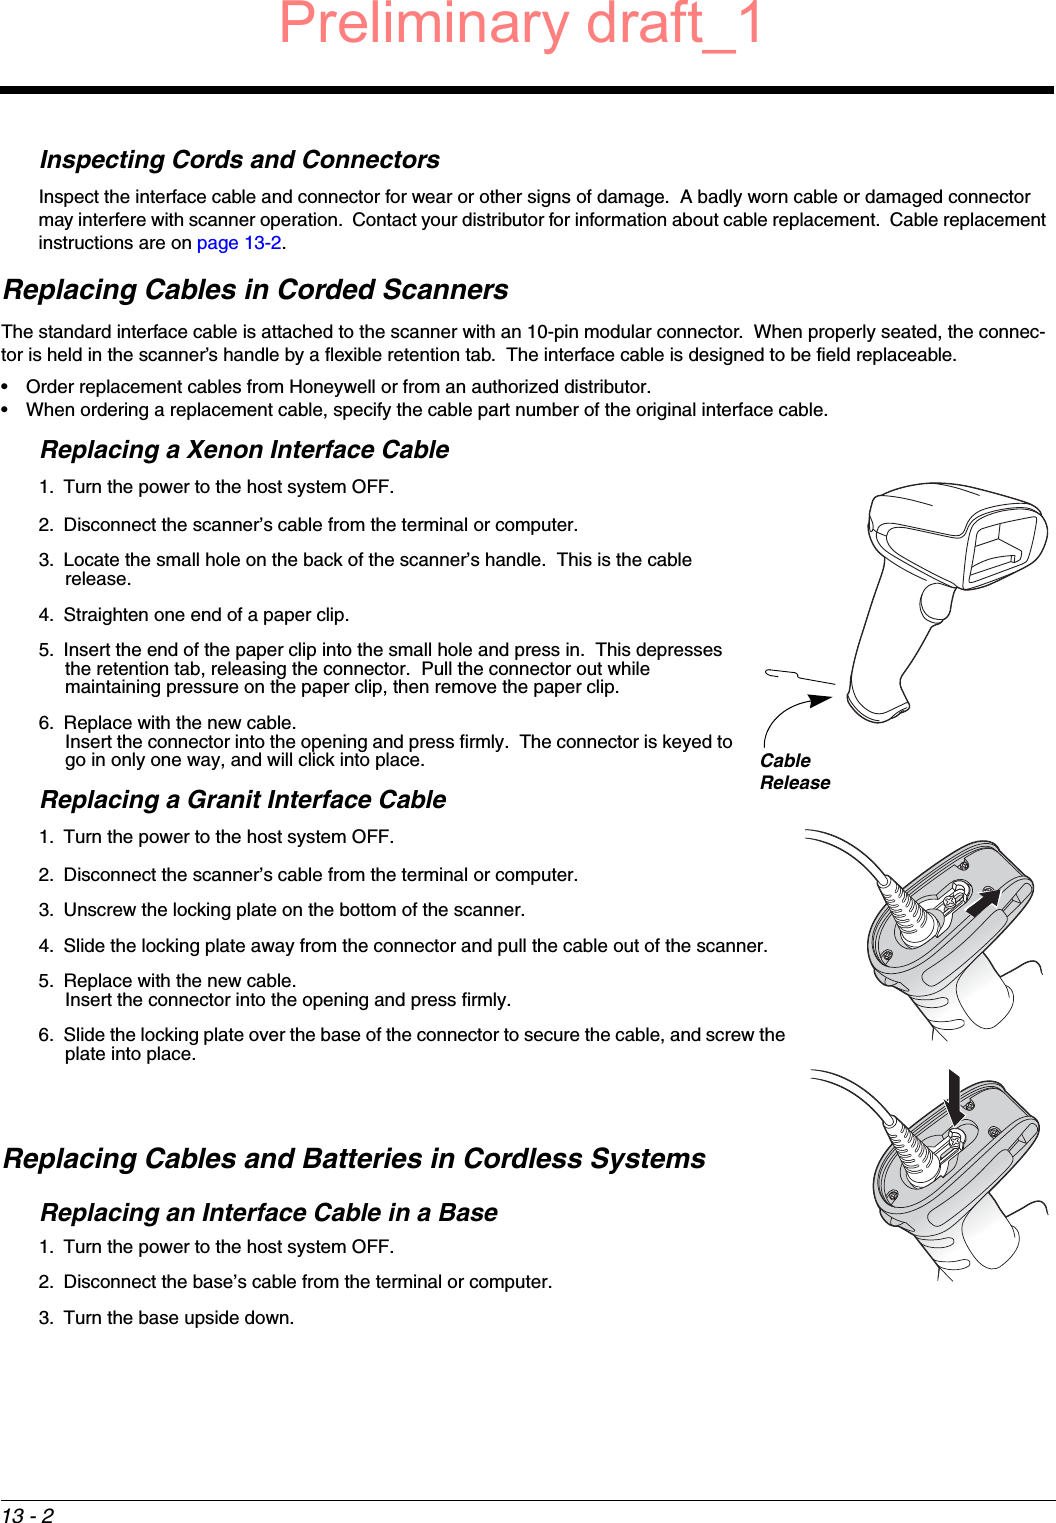 13 - 2Inspecting Cords and ConnectorsInspect the interface cable and connector for wear or other signs of damage.  A badly worn cable or damaged connector may interfere with scanner operation.  Contact your distributor for information about cable replacement.  Cable replacement instructions are on page 13-2.Replacing Cables in Corded ScannersThe standard interface cable is attached to the scanner with an 10-pin modular connector.  When properly seated, the connec-tor is held in the scanner’s handle by a flexible retention tab.  The interface cable is designed to be field replaceable.• Order replacement cables from Honeywell or from an authorized distributor.• When ordering a replacement cable, specify the cable part number of the original interface cable.Replacing a Xenon Interface Cable1. Turn the power to the host system OFF.2. Disconnect the scanner’s cable from the terminal or computer.3. Locate the small hole on the back of the scanner’s handle.  This is the cable release.4. Straighten one end of a paper clip.5. Insert the end of the paper clip into the small hole and press in.  This depresses the retention tab, releasing the connector.  Pull the connector out while maintaining pressure on the paper clip, then remove the paper clip.6. Replace with the new cable.  Insert the connector into the opening and press firmly.  The connector is keyed to go in only one way, and will click into place.Replacing a Granit Interface Cable1. Turn the power to the host system OFF.2. Disconnect the scanner’s cable from the terminal or computer.3. Unscrew the locking plate on the bottom of the scanner.4. Slide the locking plate away from the connector and pull the cable out of the scanner.5. Replace with the new cable.  Insert the connector into the opening and press firmly.  6. Slide the locking plate over the base of the connector to secure the cable, and screw the plate into place.Replacing Cables and Batteries in Cordless SystemsReplacing an Interface Cable in a Base1. Turn the power to the host system OFF.2. Disconnect the base’s cable from the terminal or computer.3. Turn the base upside down.CableReleasePreliminary draft_1